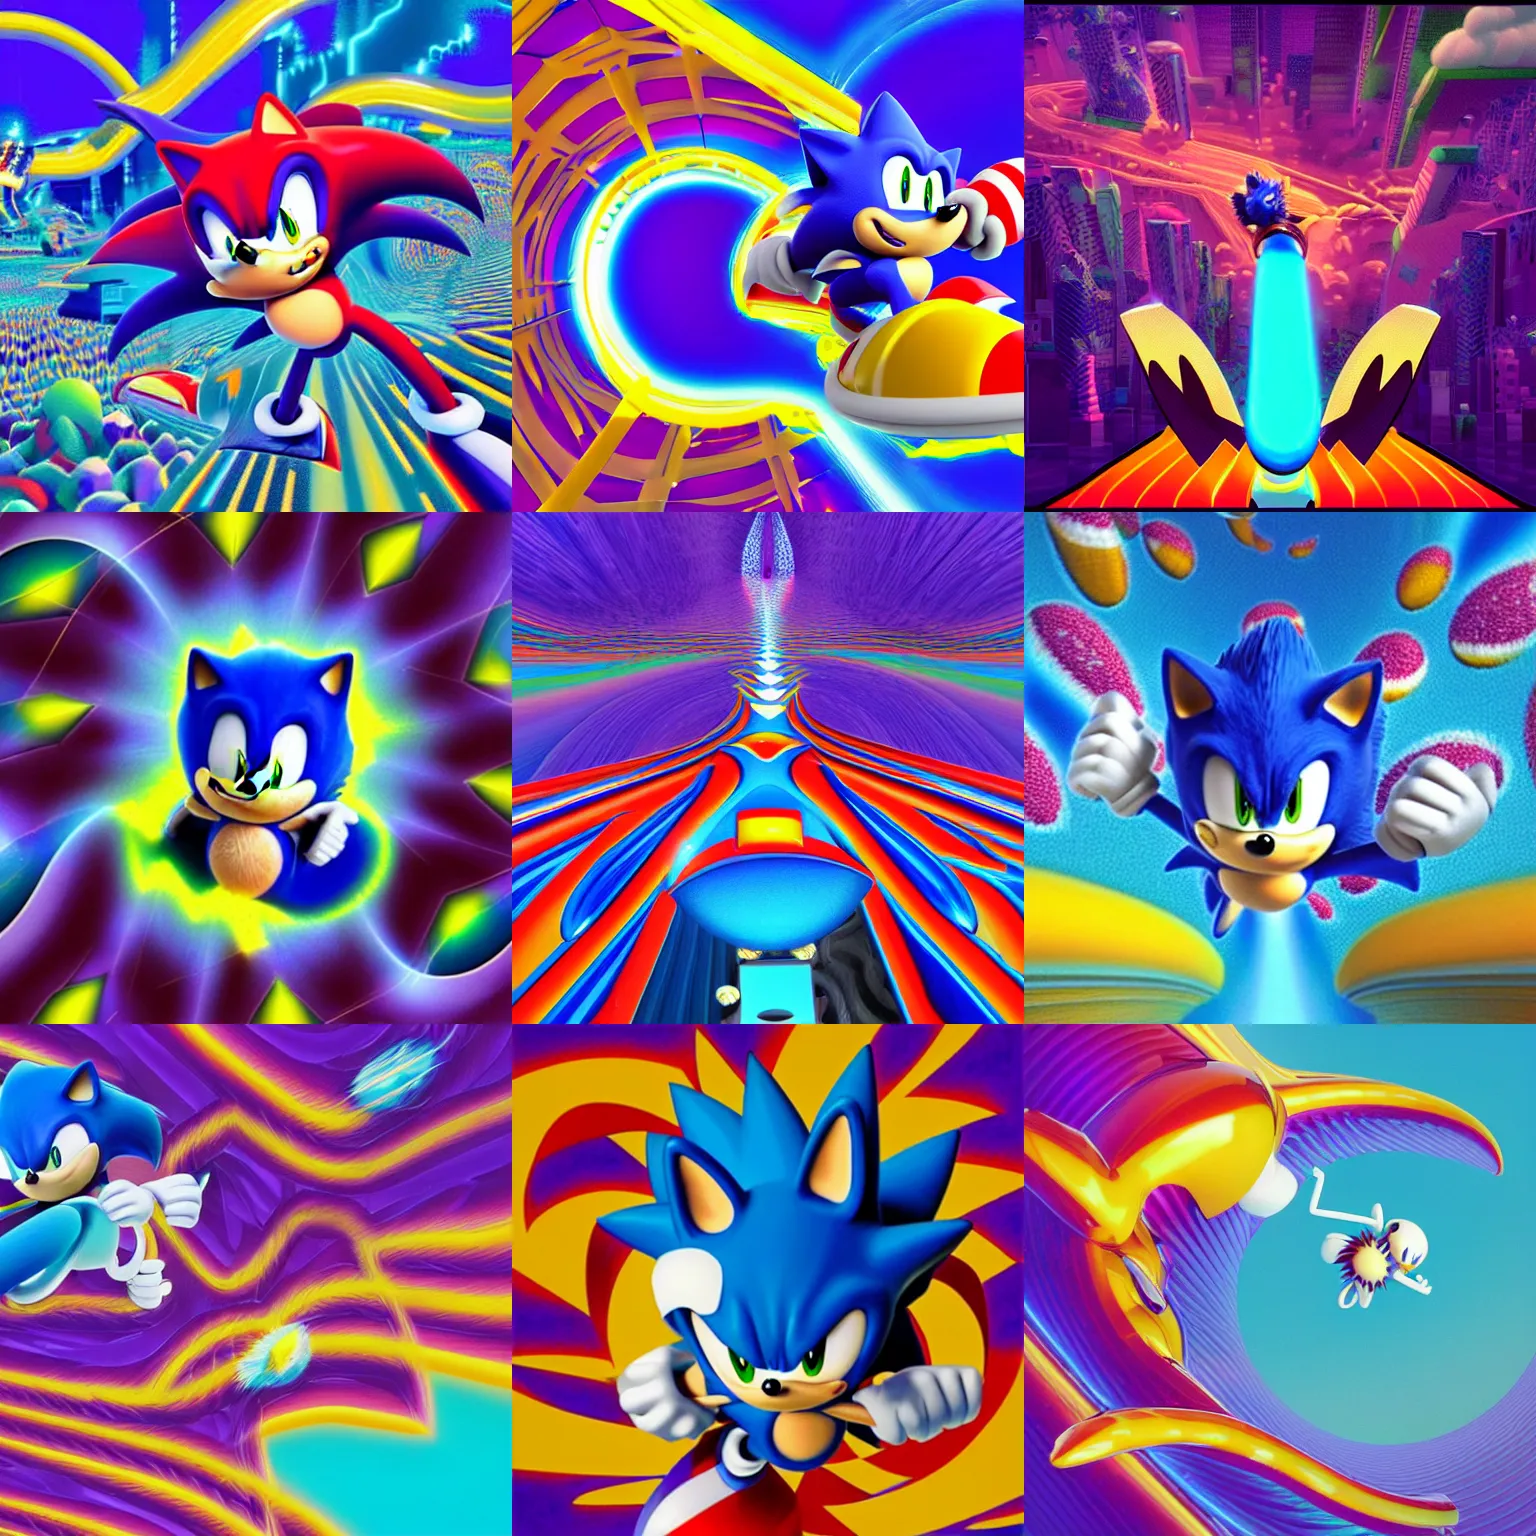 Prompt: a recursive surreal sonic the hedgehog, sharp, detailed professional, high quality unreal engine hard surface render MGMT tame impala album cover of a liquid dissolving LSD DMT sonic the hedgehog surfing through cyberspace, purple checkerboard background, 1990s 1992 Sega Genesis video game album cover,